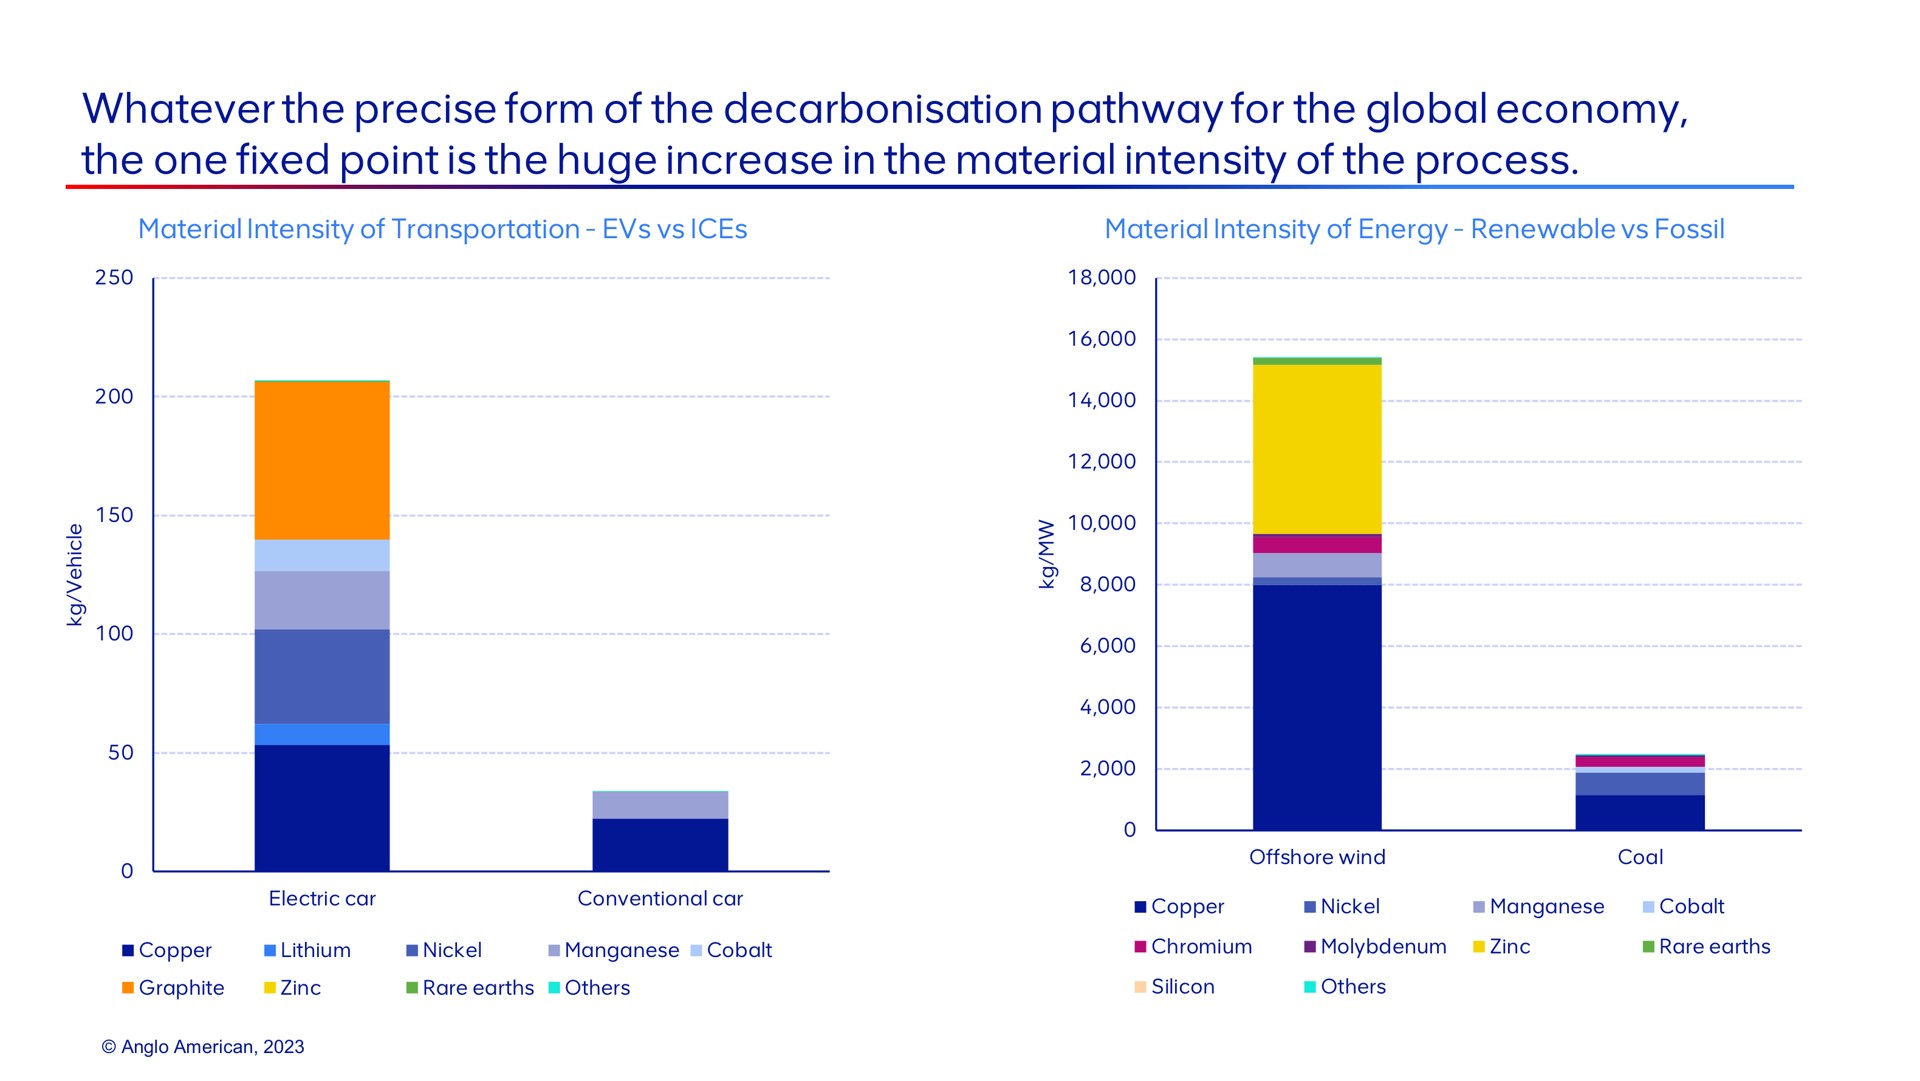 whatever the precise form of the pathway for the global economy the one fixed point is the huge increase in the material intensity of the process | AngloAmerican